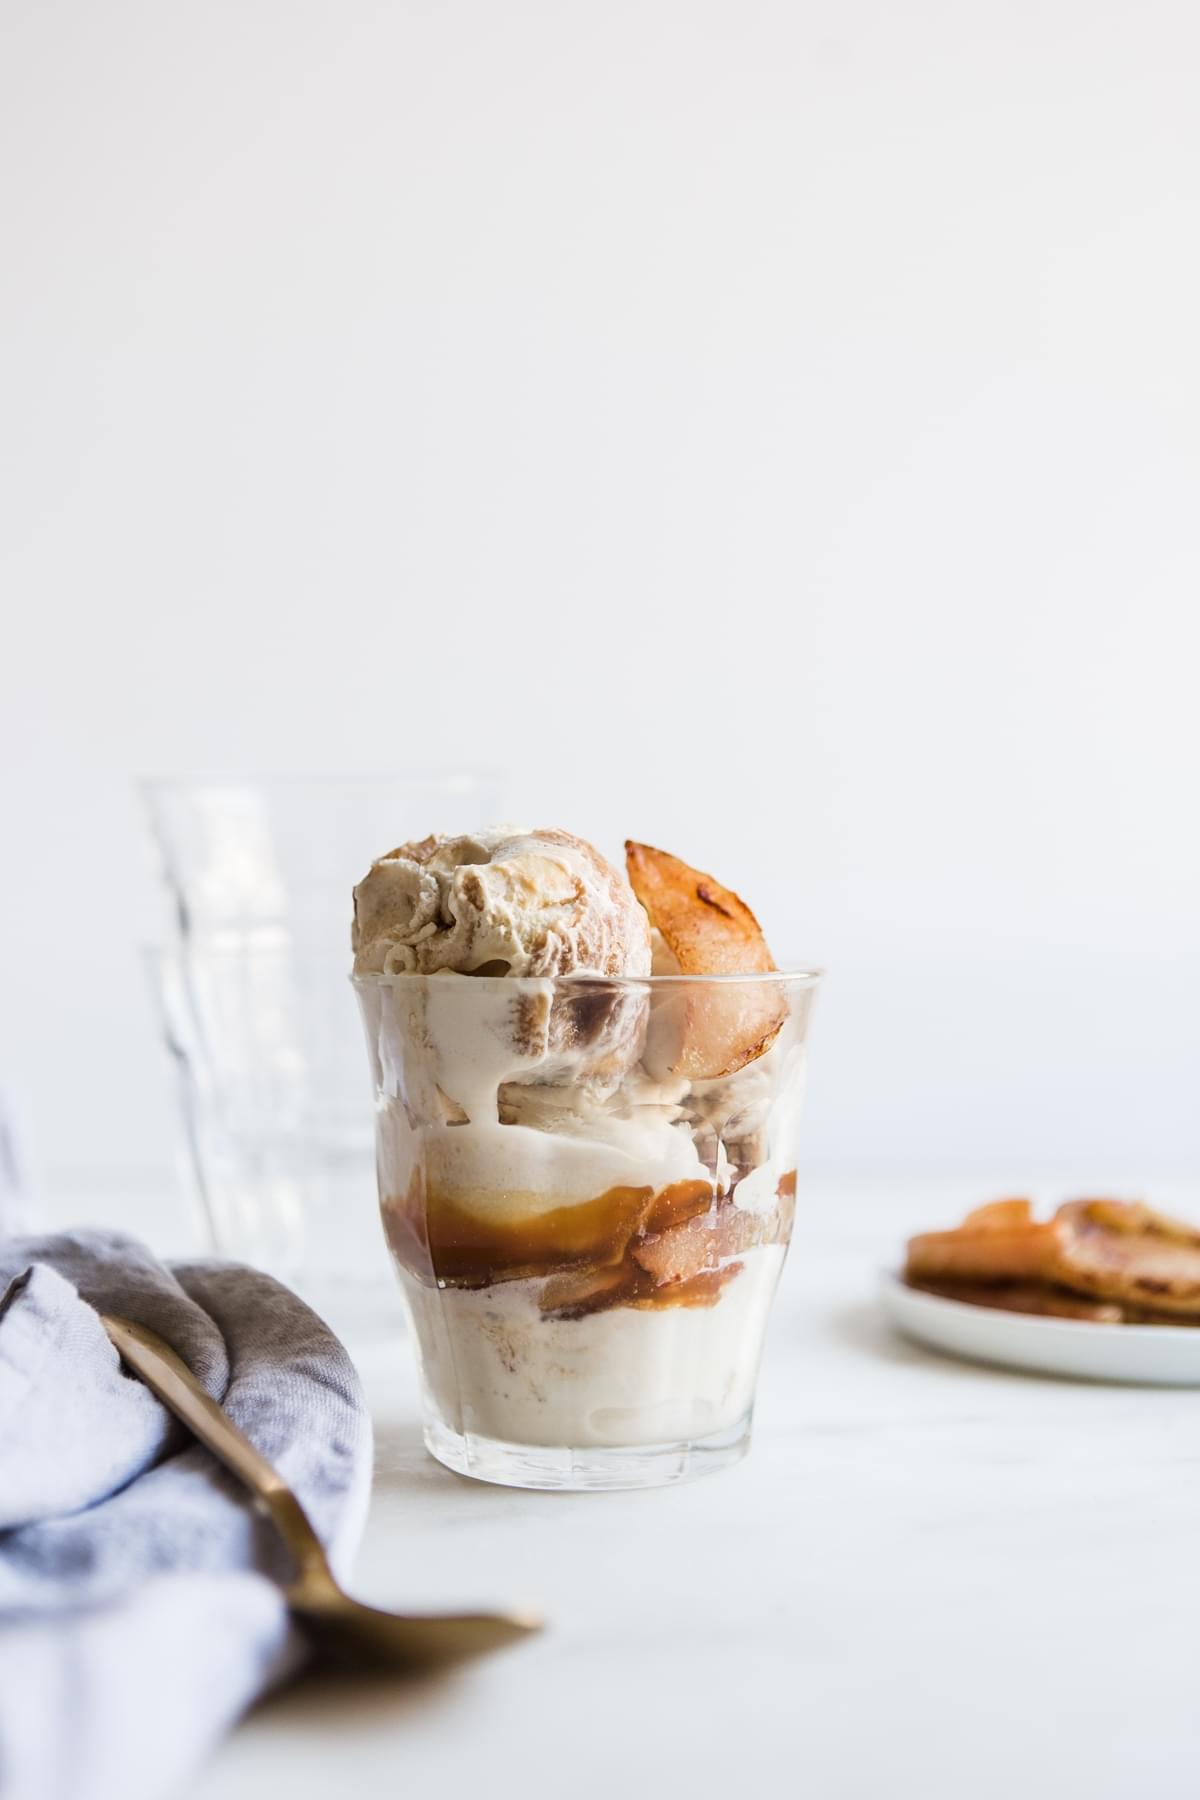 A salted caramel apple sundae in a cup with a spoon and linen